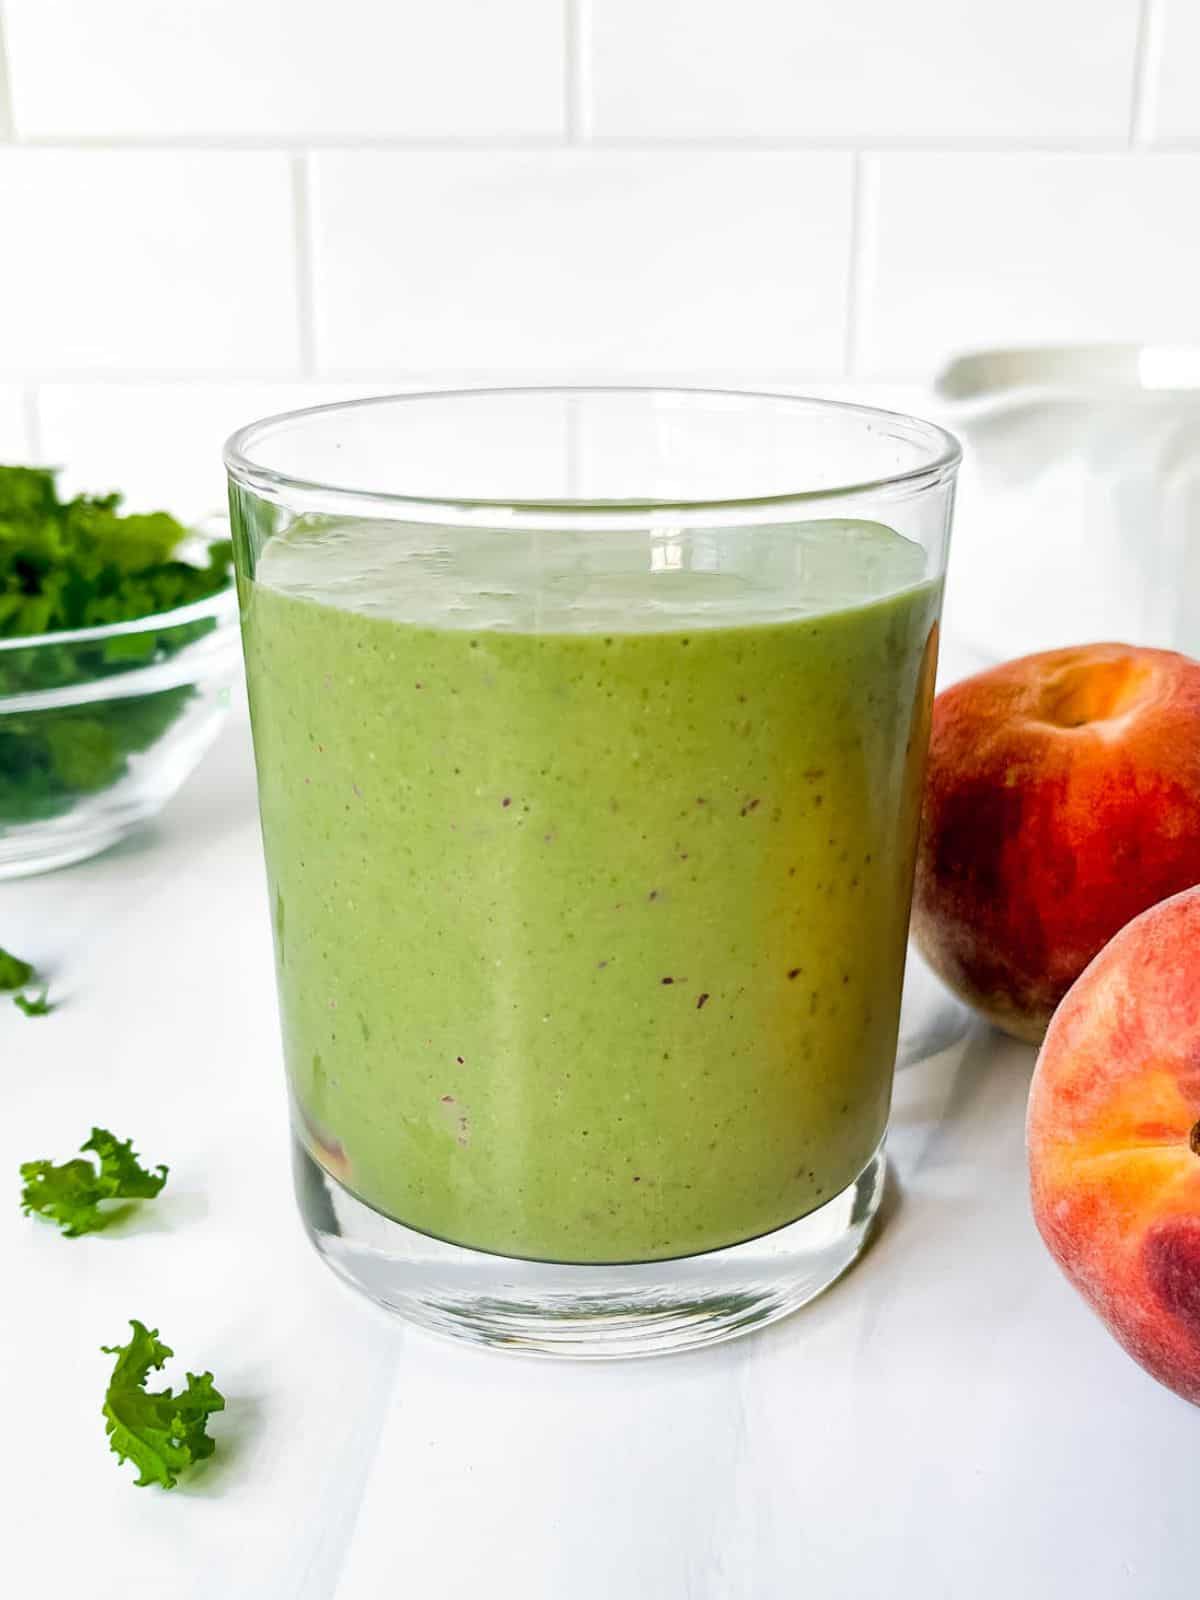 peach kale smoothie in a glass next to peaches and a bowl of kale leaves.